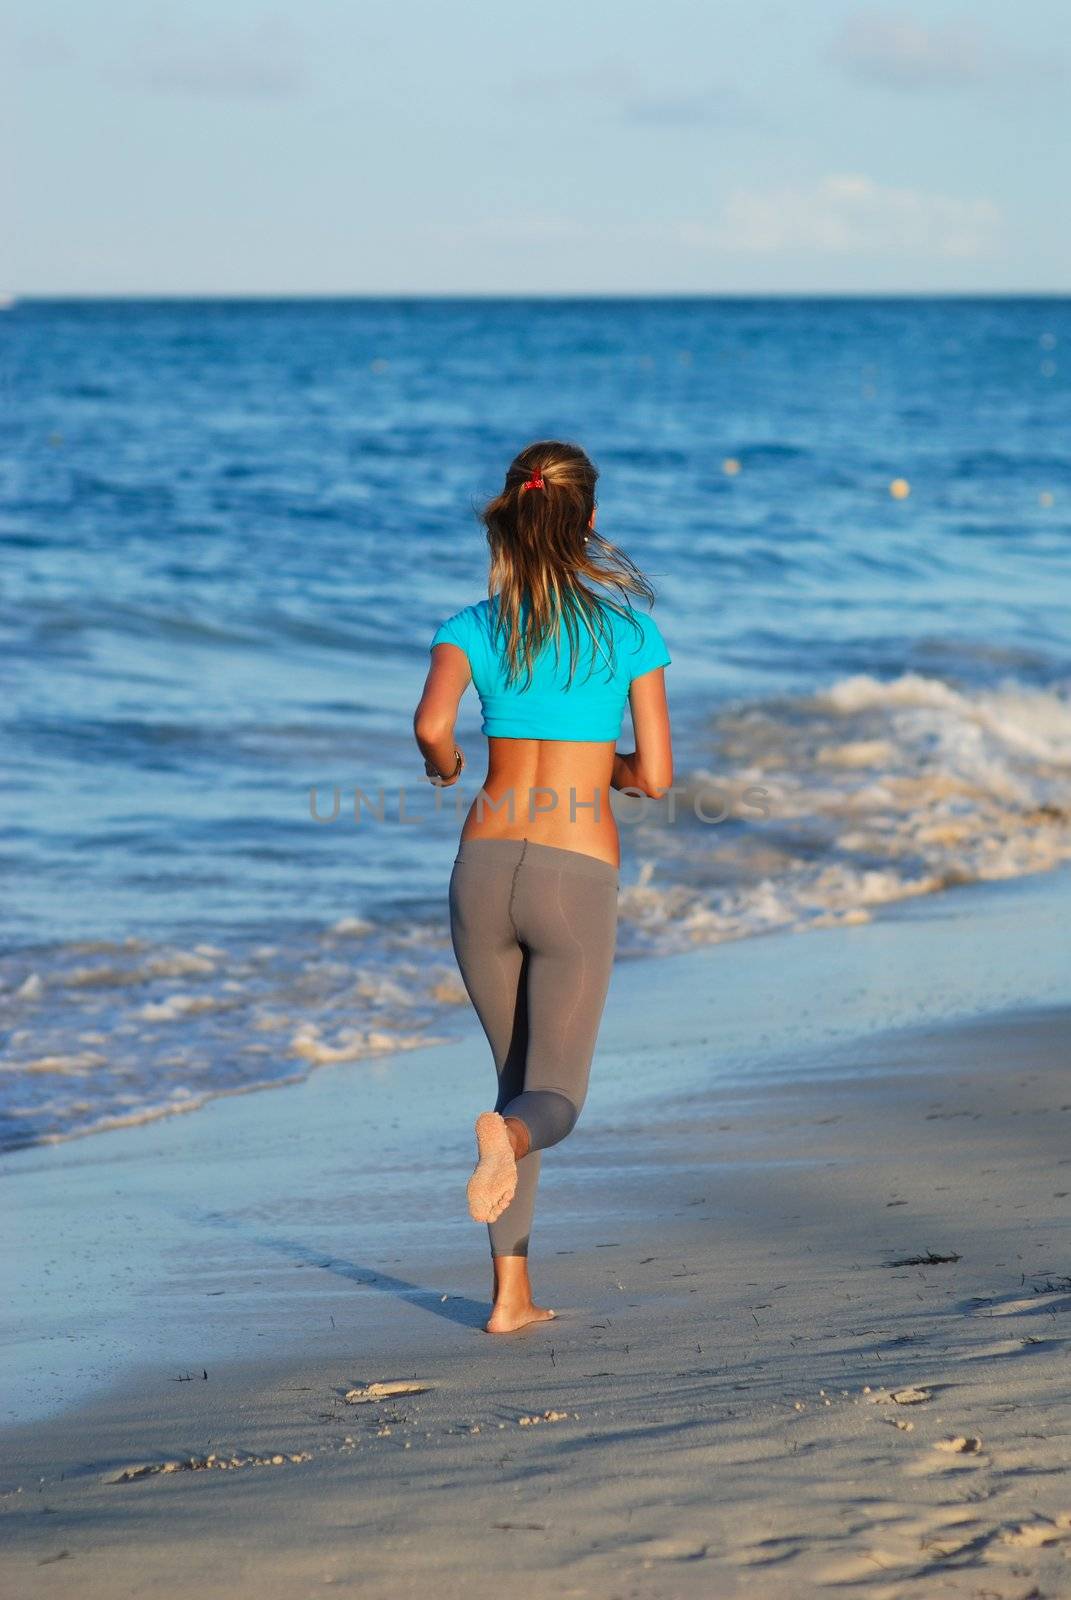 Jogging at beach by haveseen